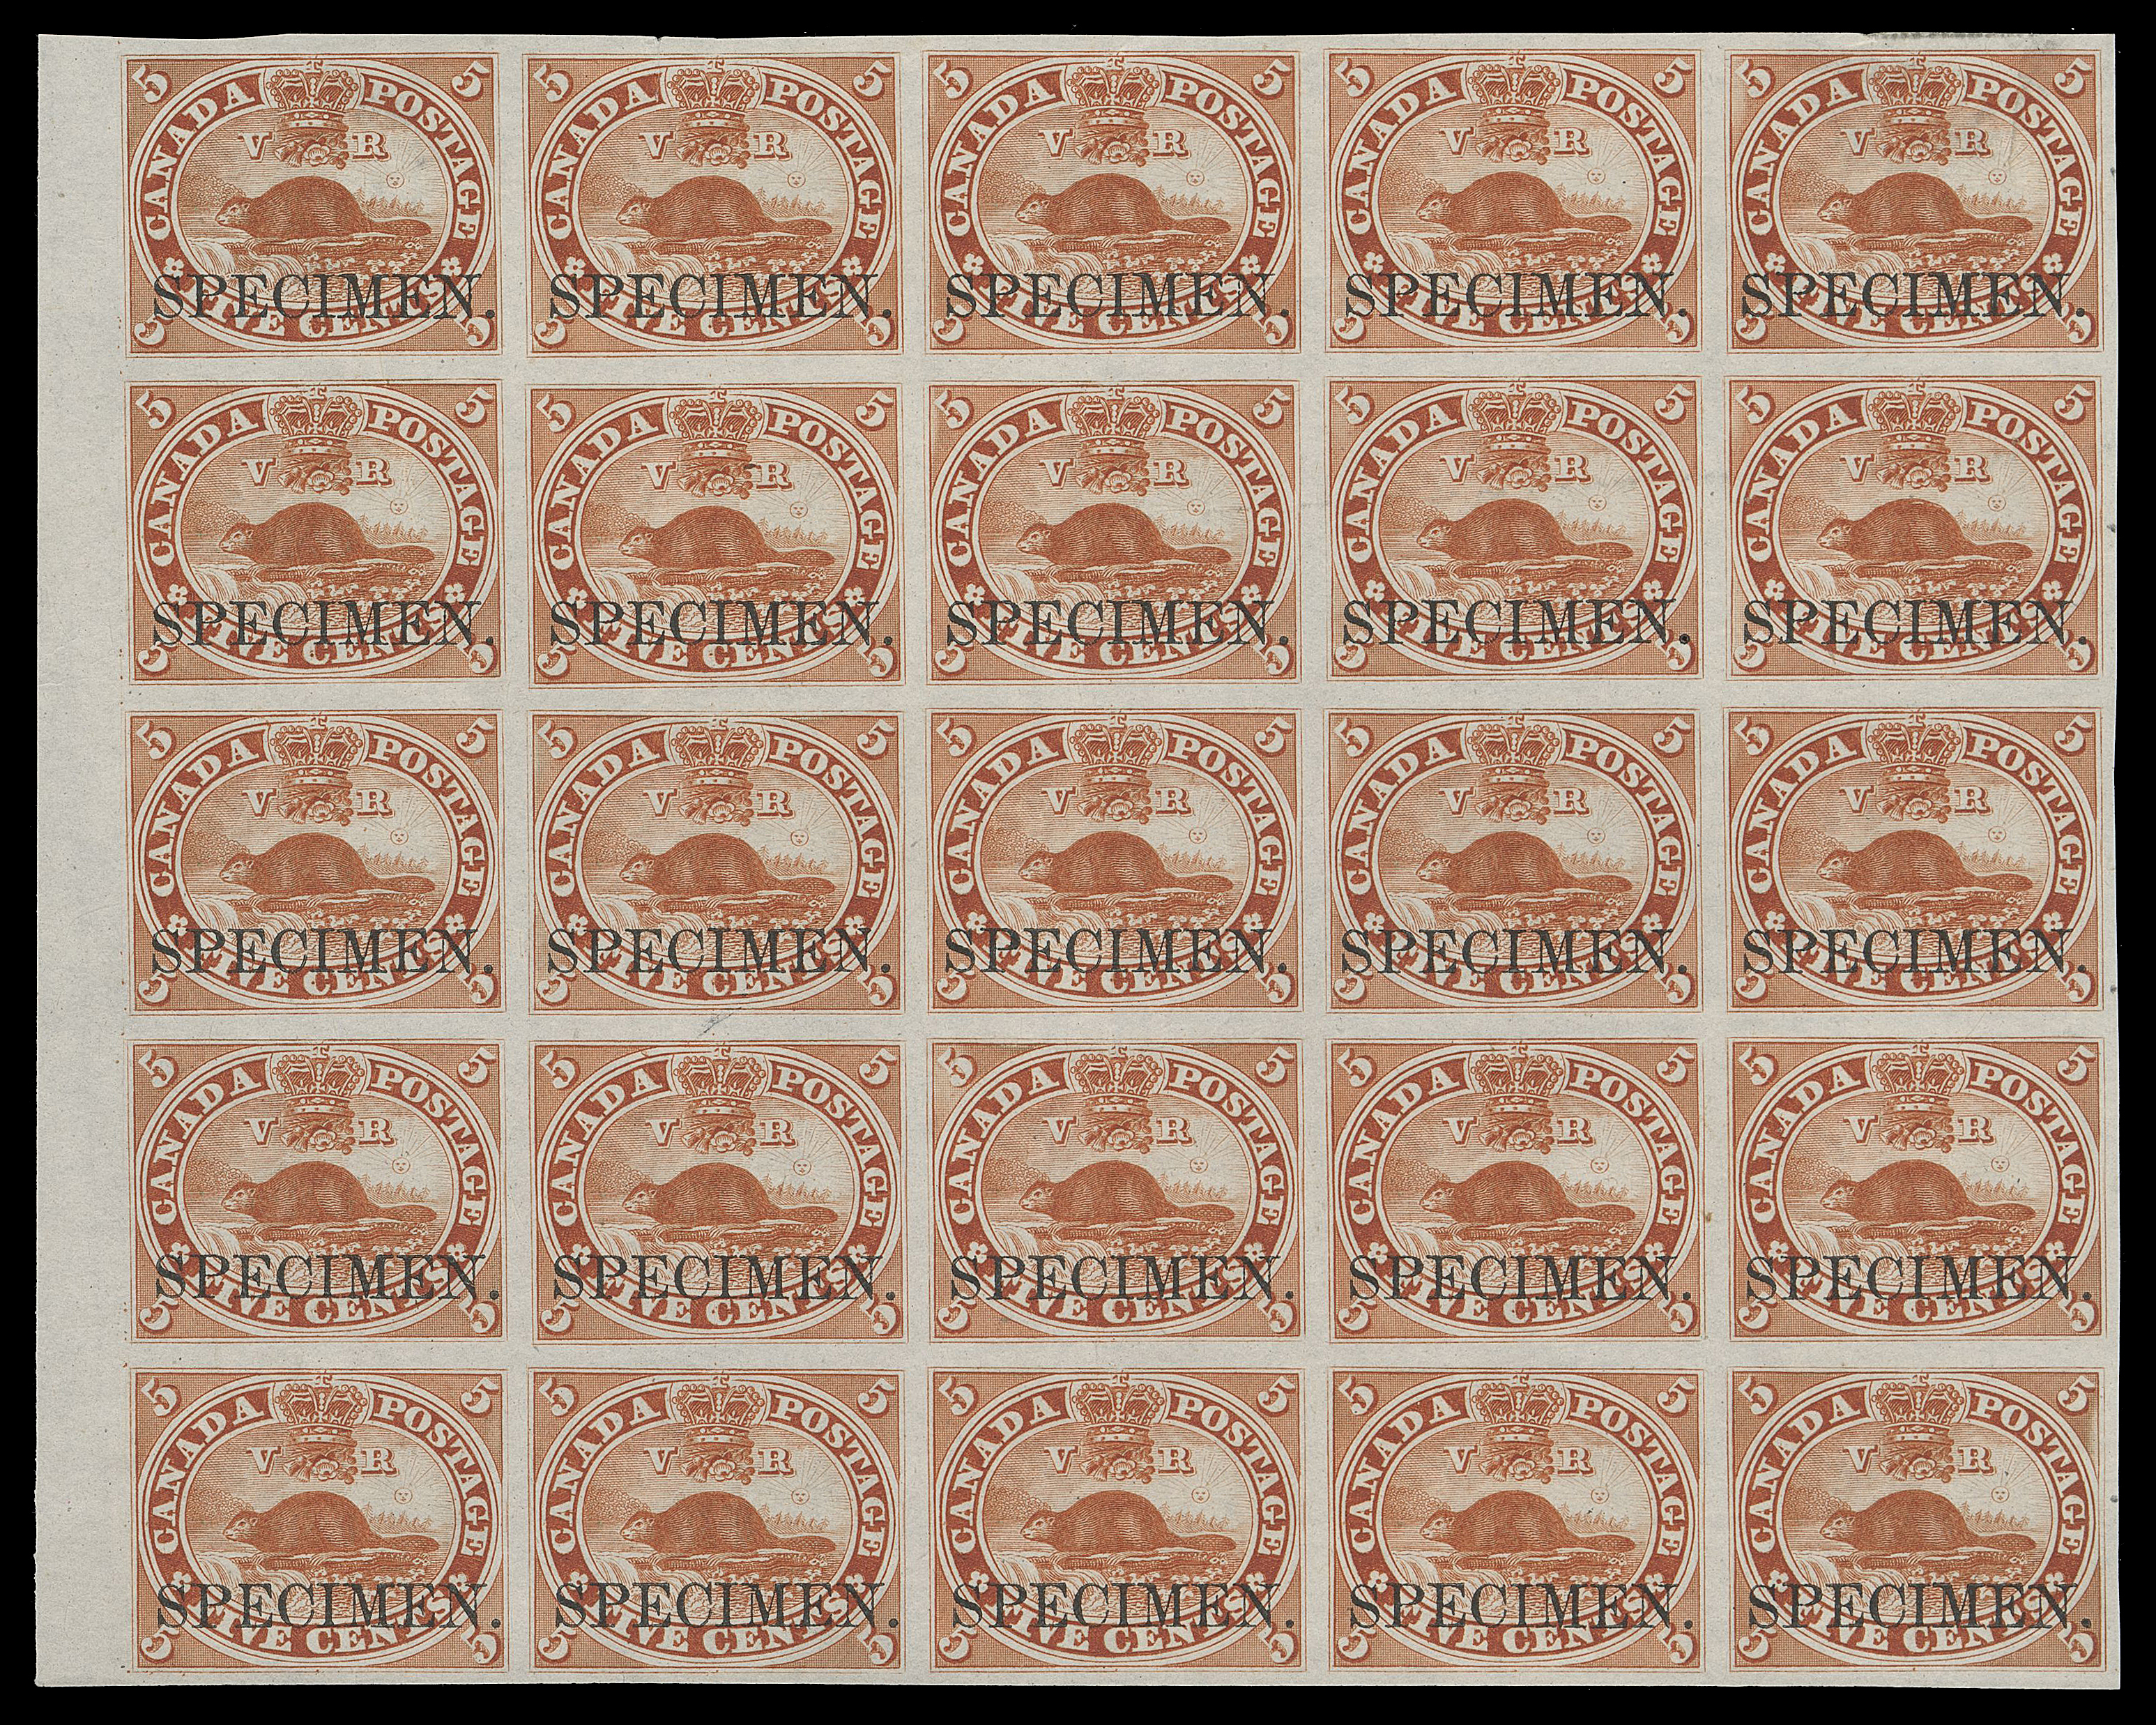 THREE PENCE AND FIVE CENTS  15TCiv,An impressive trial colour plate proof block of twenty-five, printed in brown red on india paper with horizontal SPECIMEN overprint in black (Positions 51-55 / 91-95); an earlier State of the plate as no imprint appears in selvedge (only added after State 6 circa. 1865), most striking and very scarce, VF (Unitrade cat. $6,250)

Provenance: Dale-Lichtenstein, Sale 7 - BNA Part Three, H.R. Harmer Inc., January 1970; Lot 974
Clayton Huff Cents Issue, Maresch Sale 207, November 1987; Lot 222